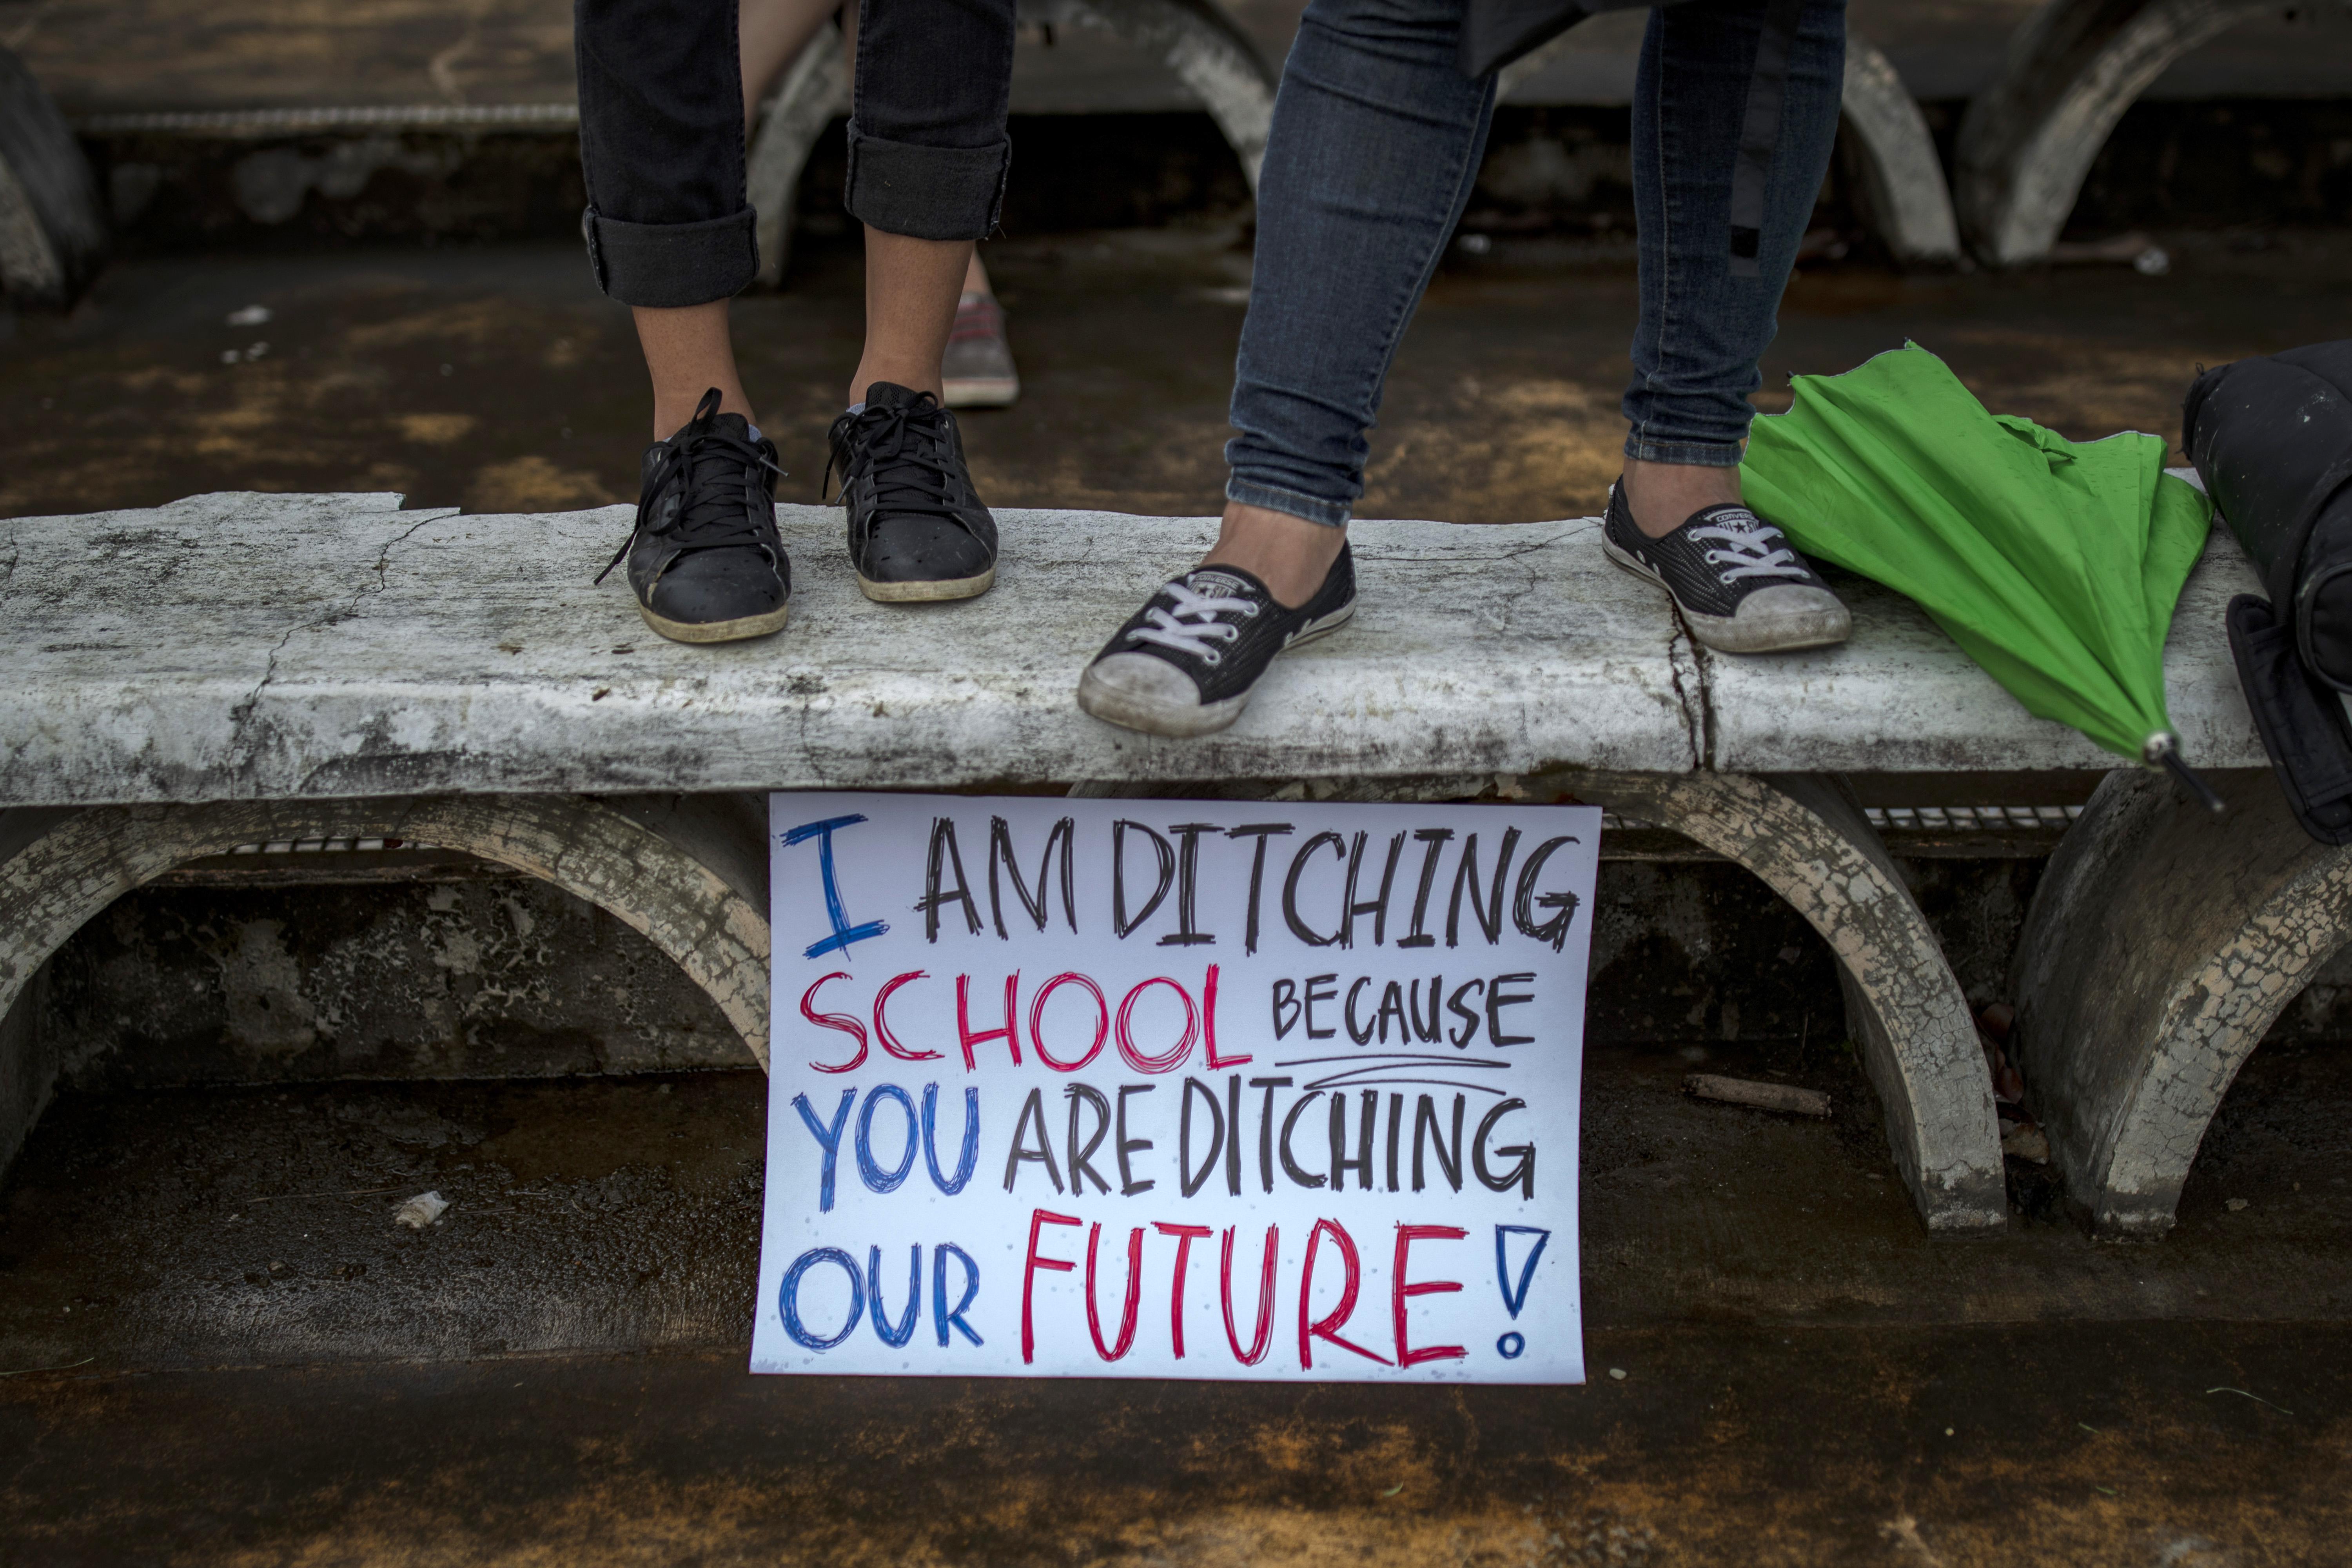 Filipino students stand over a sign that says "I am ditching school because you our ditching our future."